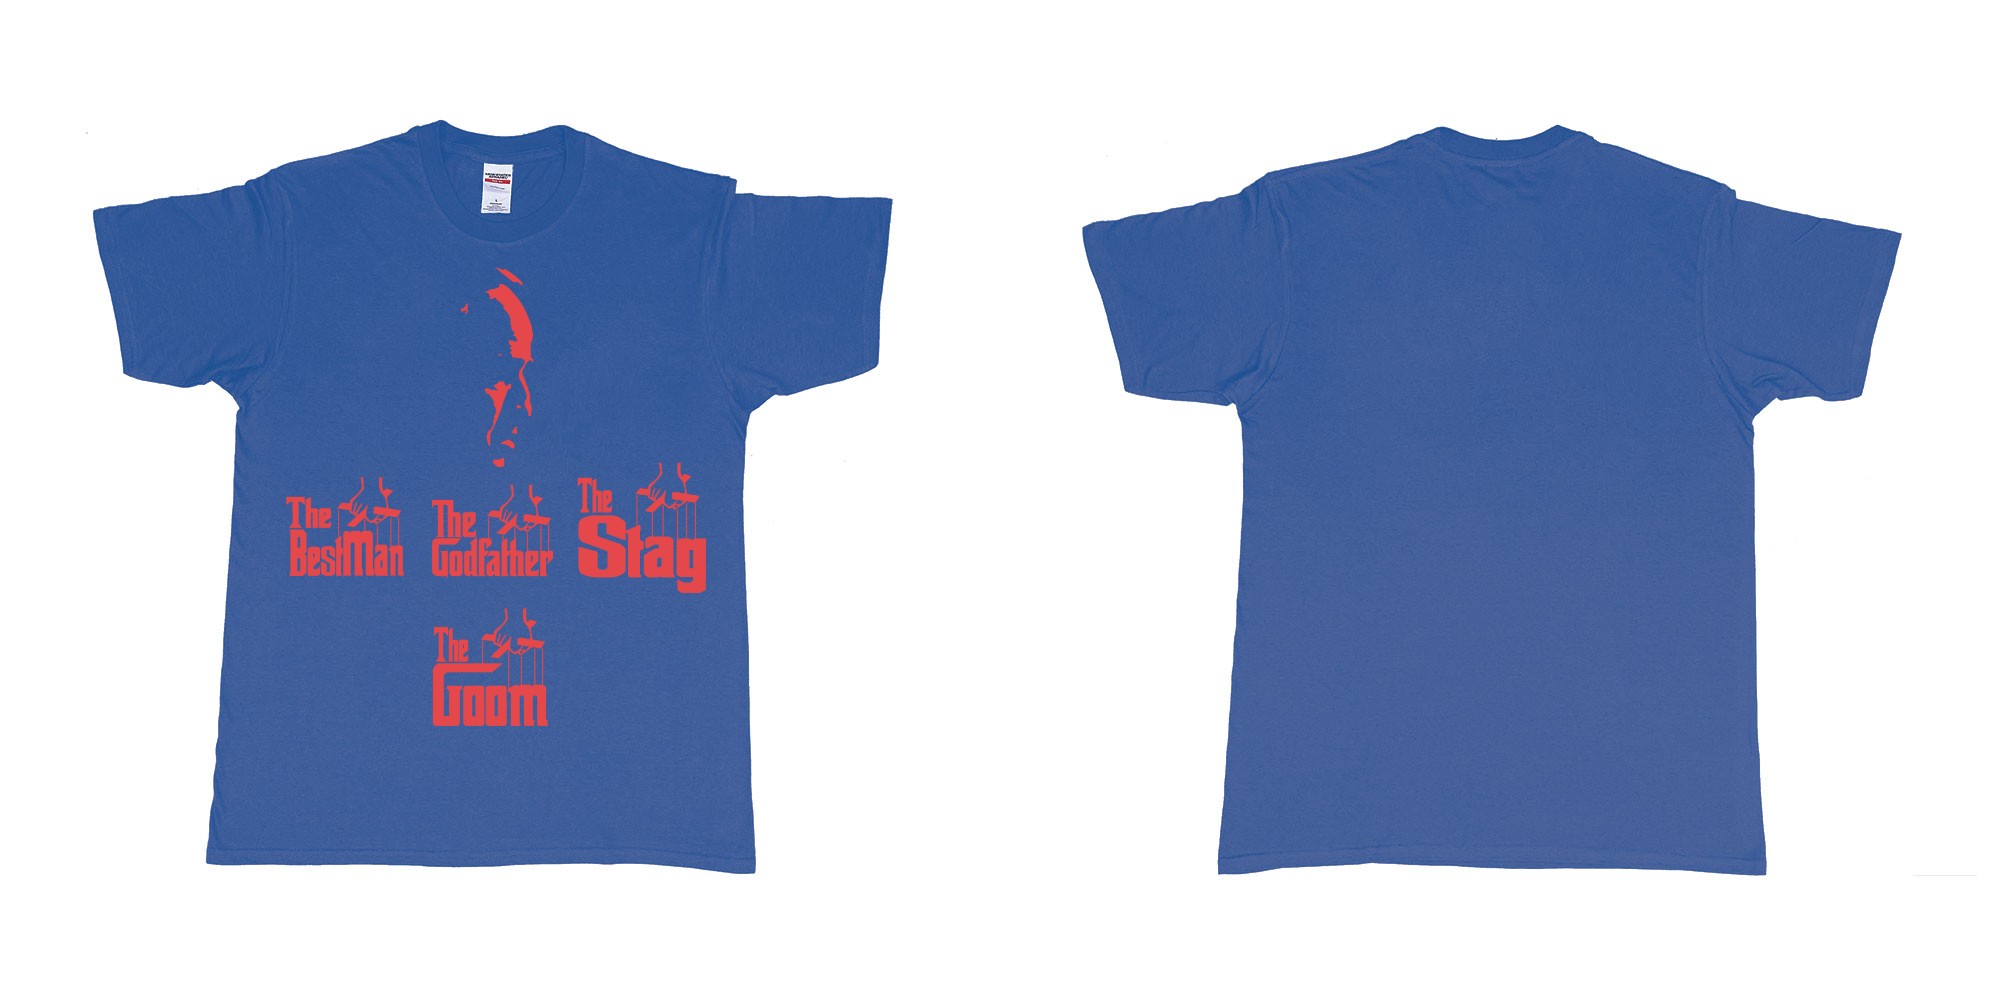 Custom tshirt design TPW the godfather in fabric color royal-blue choice your own text made in Bali by The Pirate Way